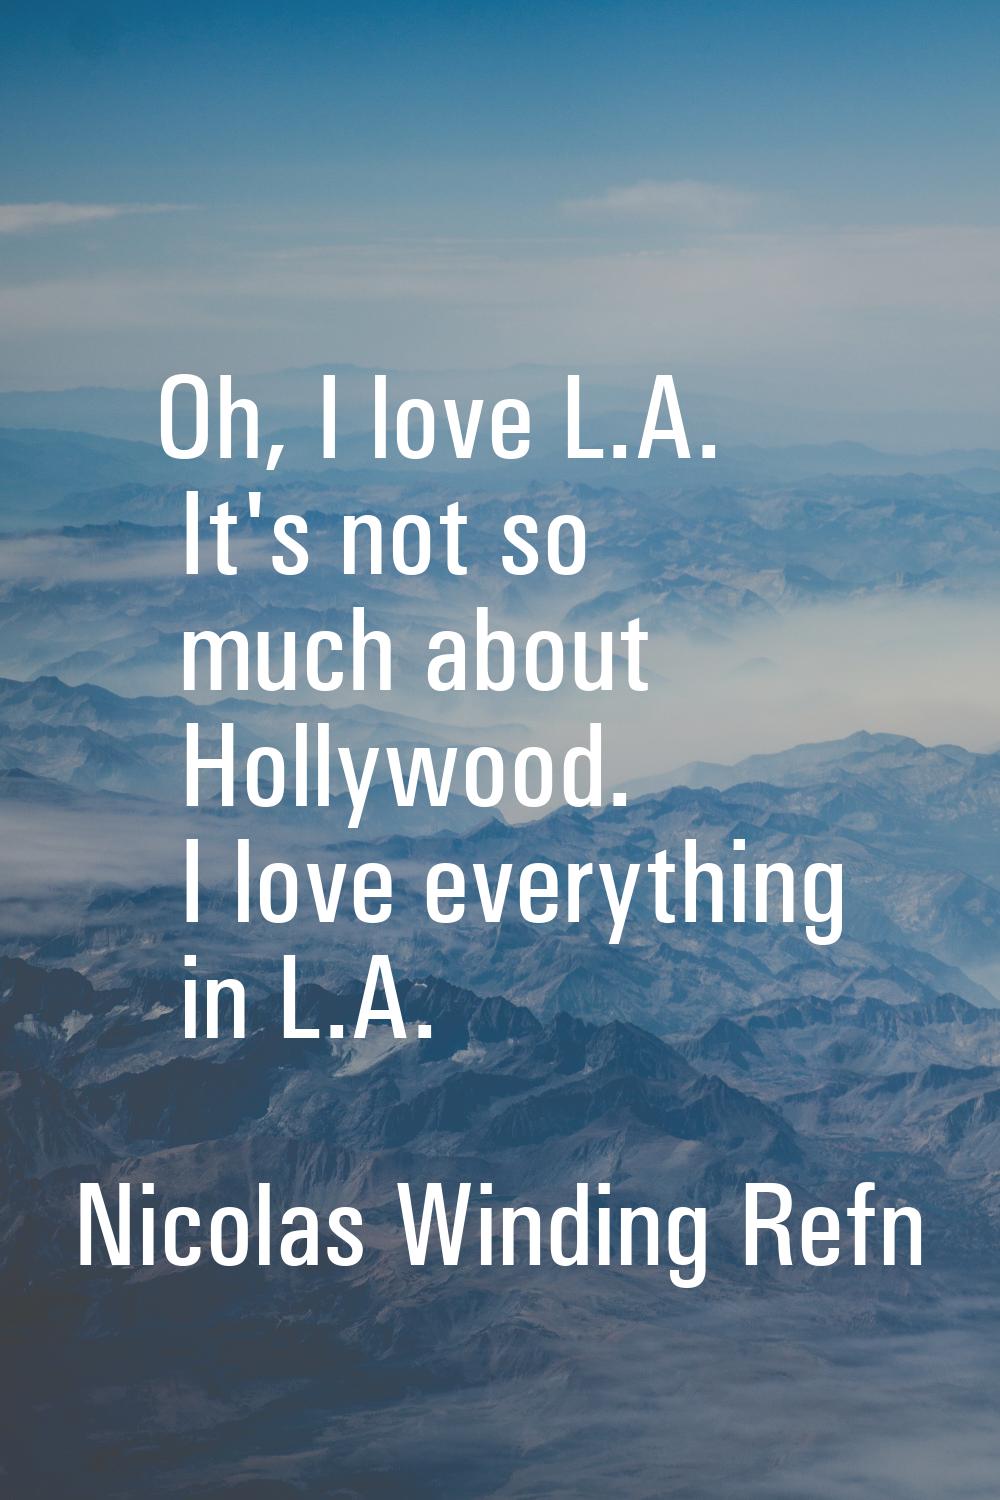 Oh, I love L.A. It's not so much about Hollywood. I love everything in L.A.